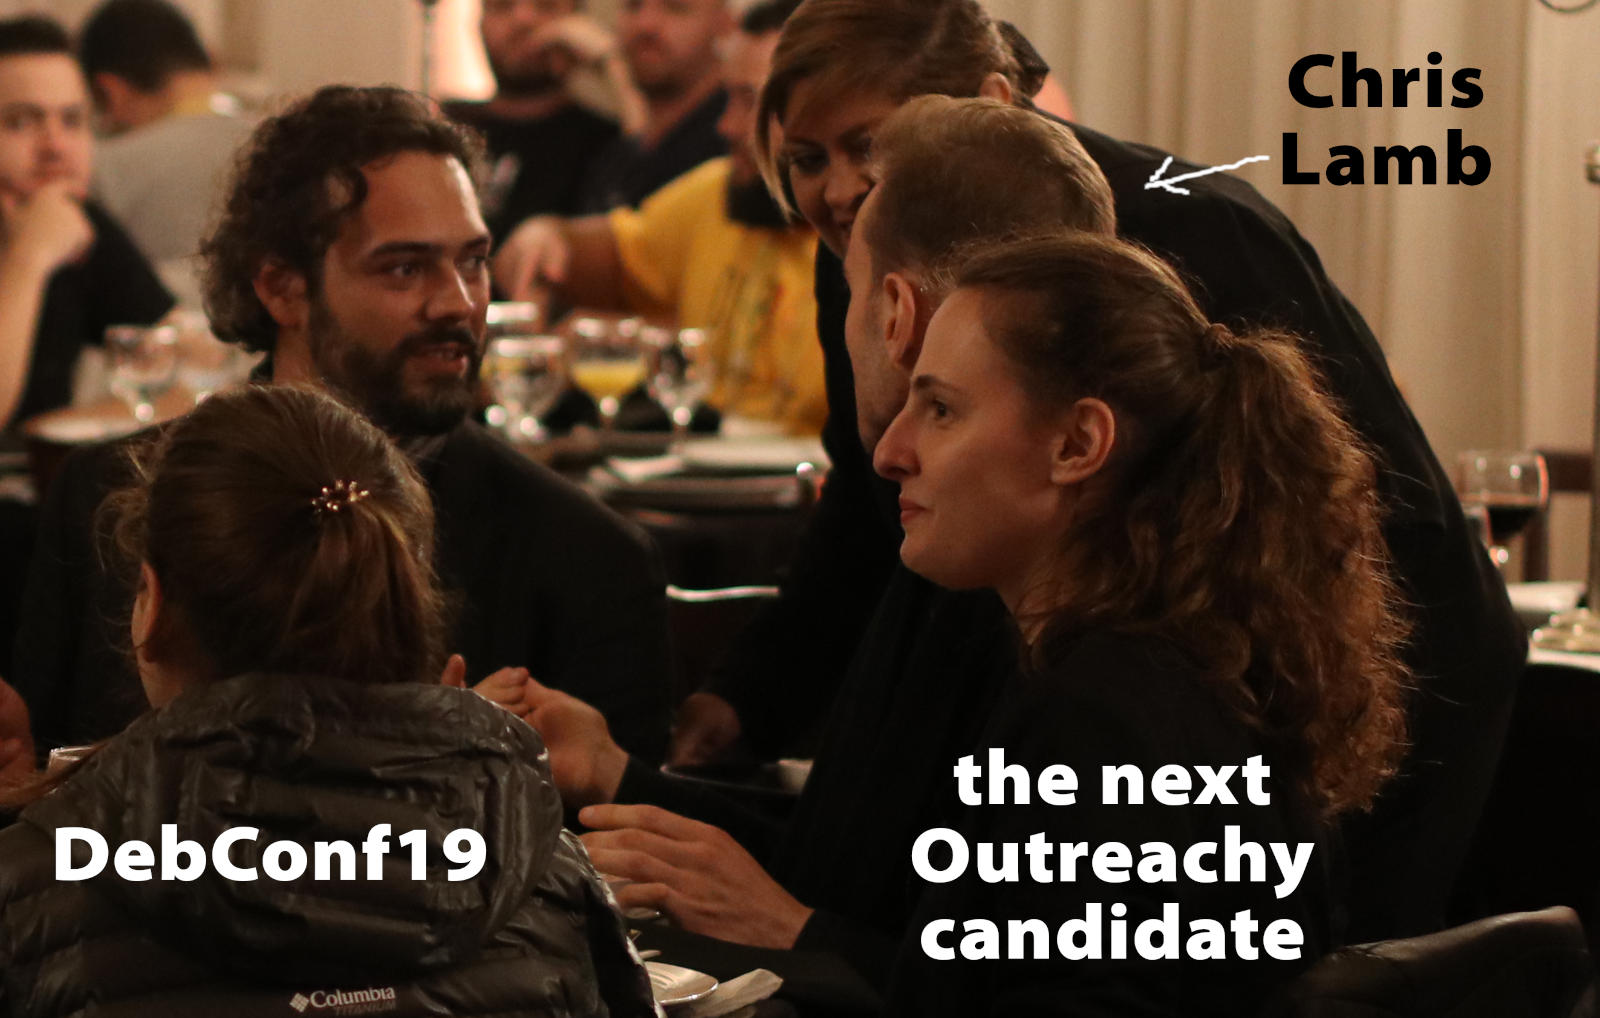 DebConf19, Chris Lamb, lamby, outreachy candidate, dinner date